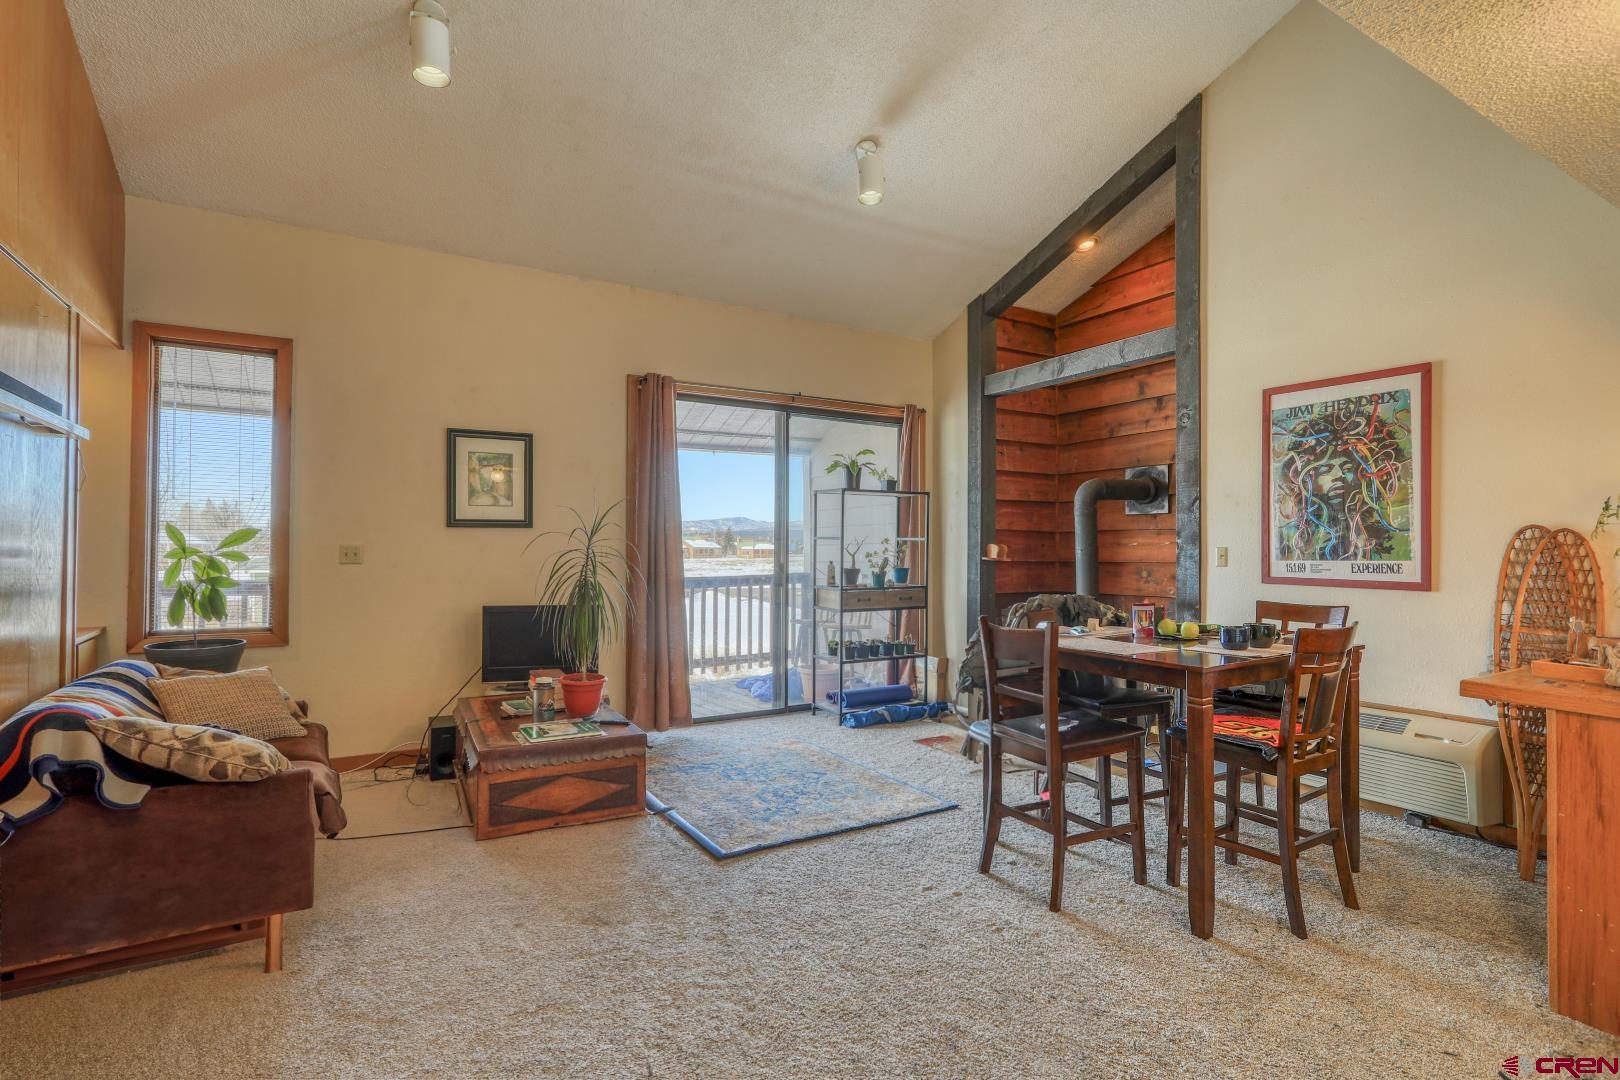 89 Valley View Drive, #3197, Pagosa Springs, CO 81147 Listing Photo  6